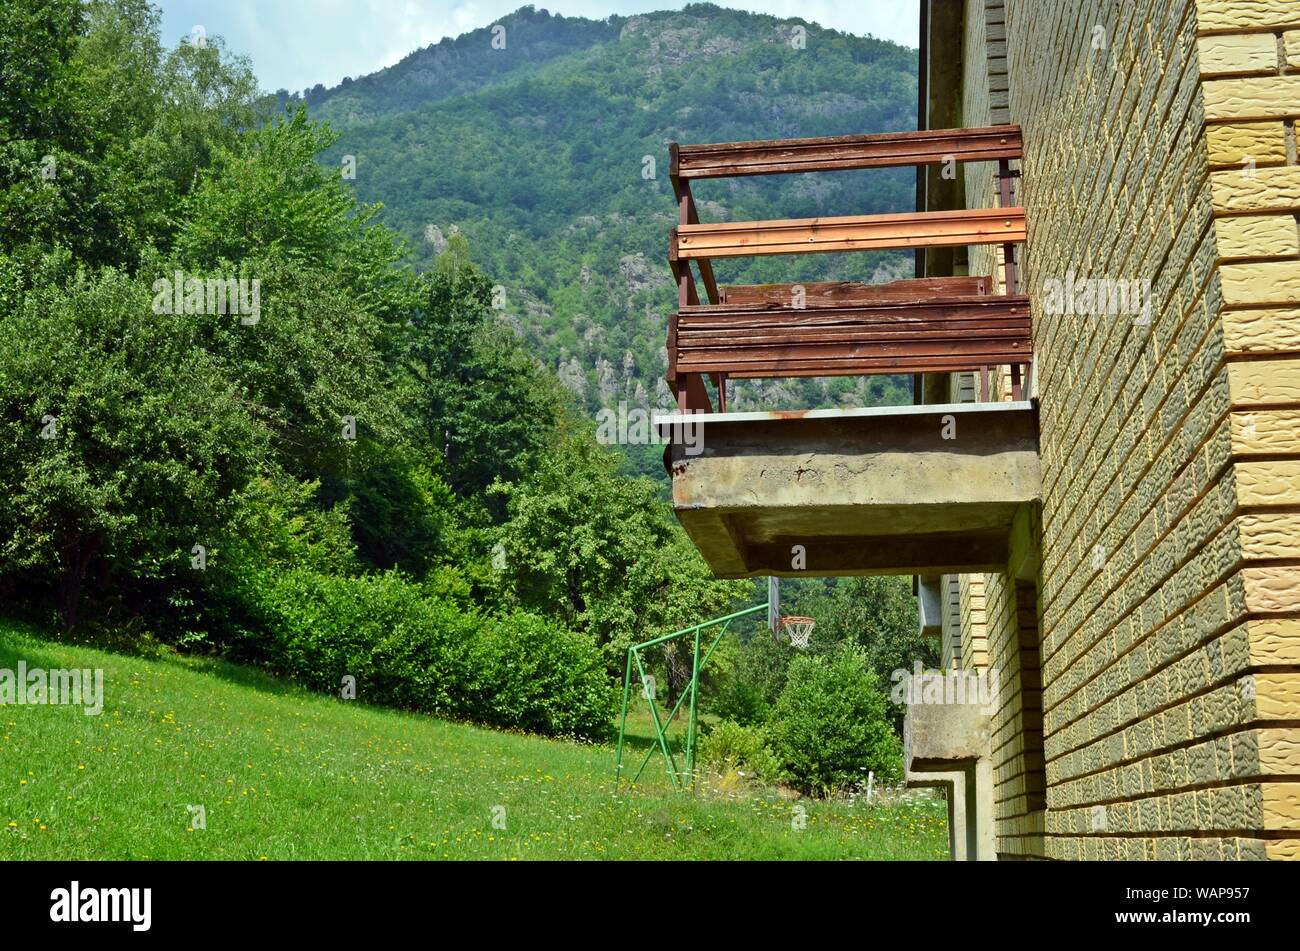 A wooden balcony of a yellow brick mountain village house with a basketball outdoor court and a mountain in the background, a forest on the left side Stock Photo